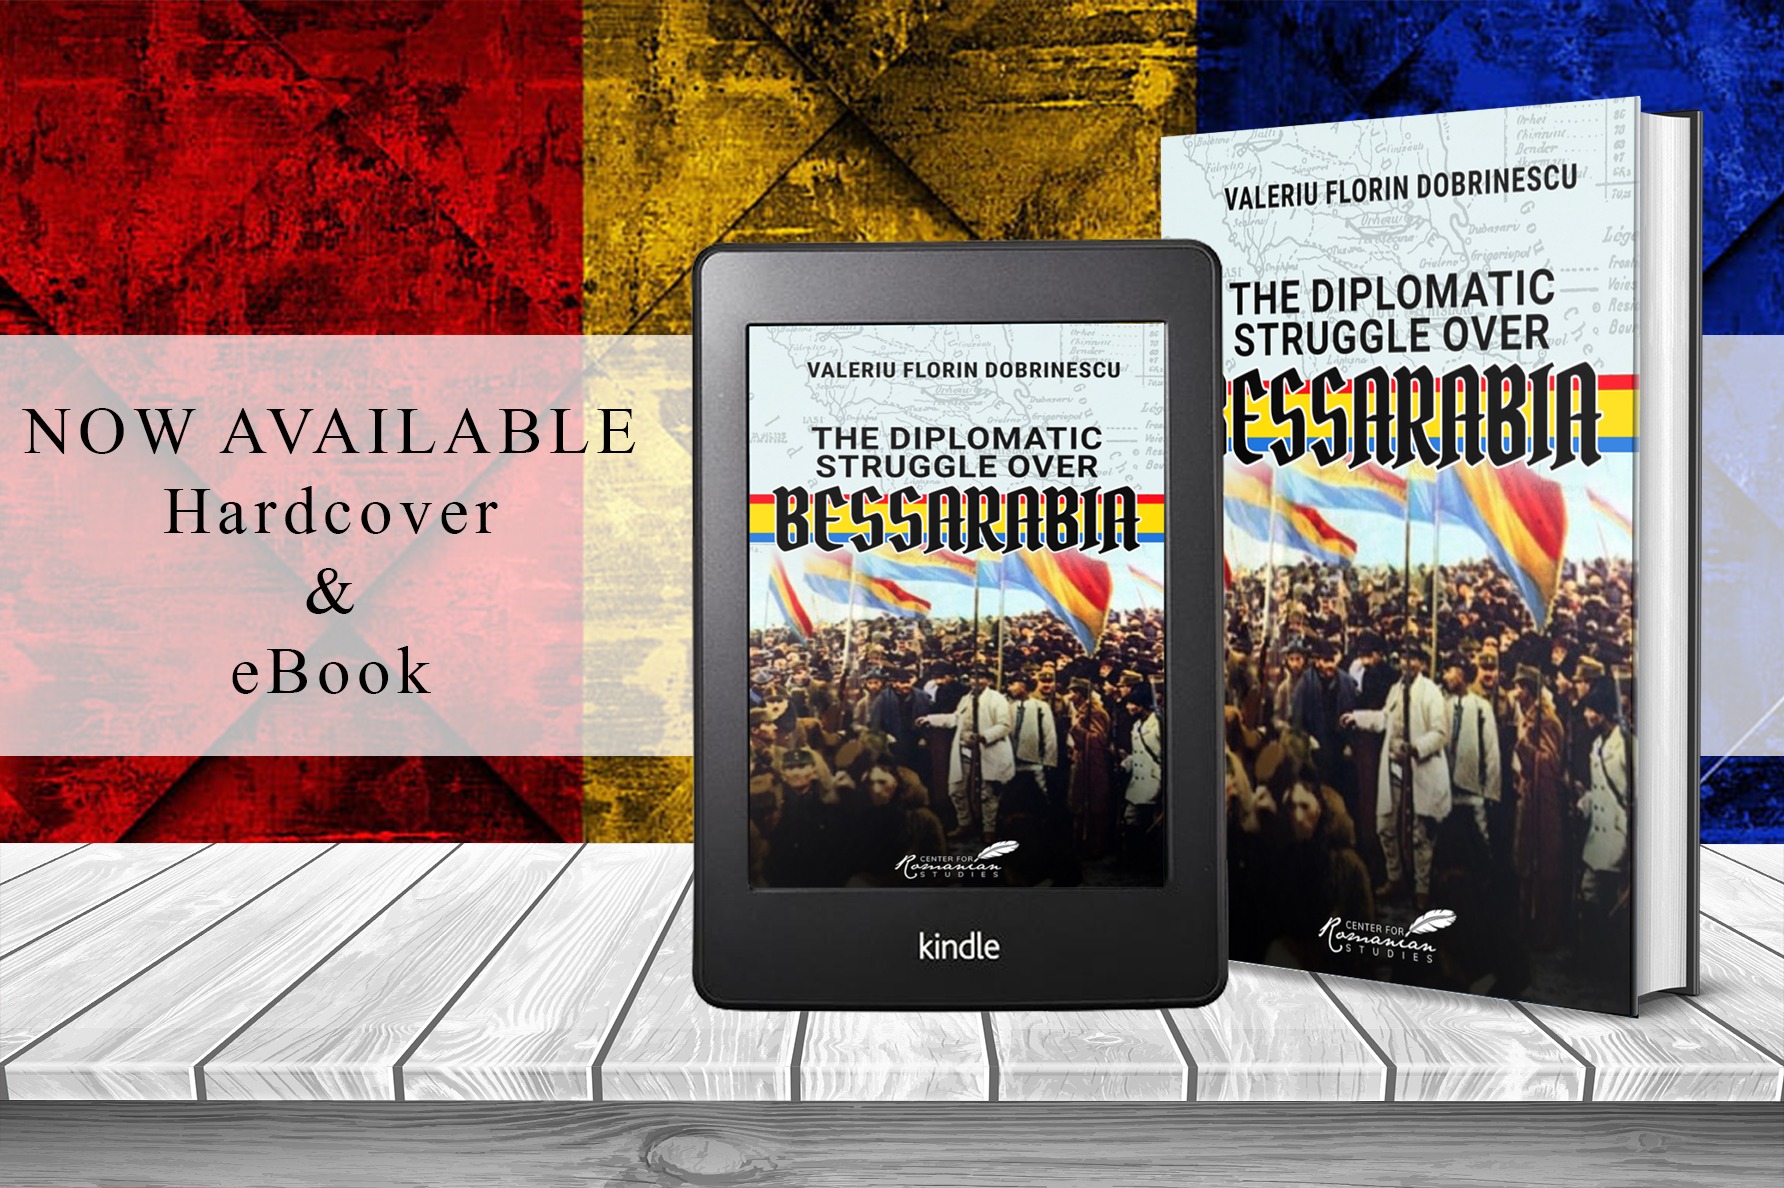 The Diplomatic Struggle over Bessarabia by Valeriu Florin Dobrinescu, available now from Histria Books